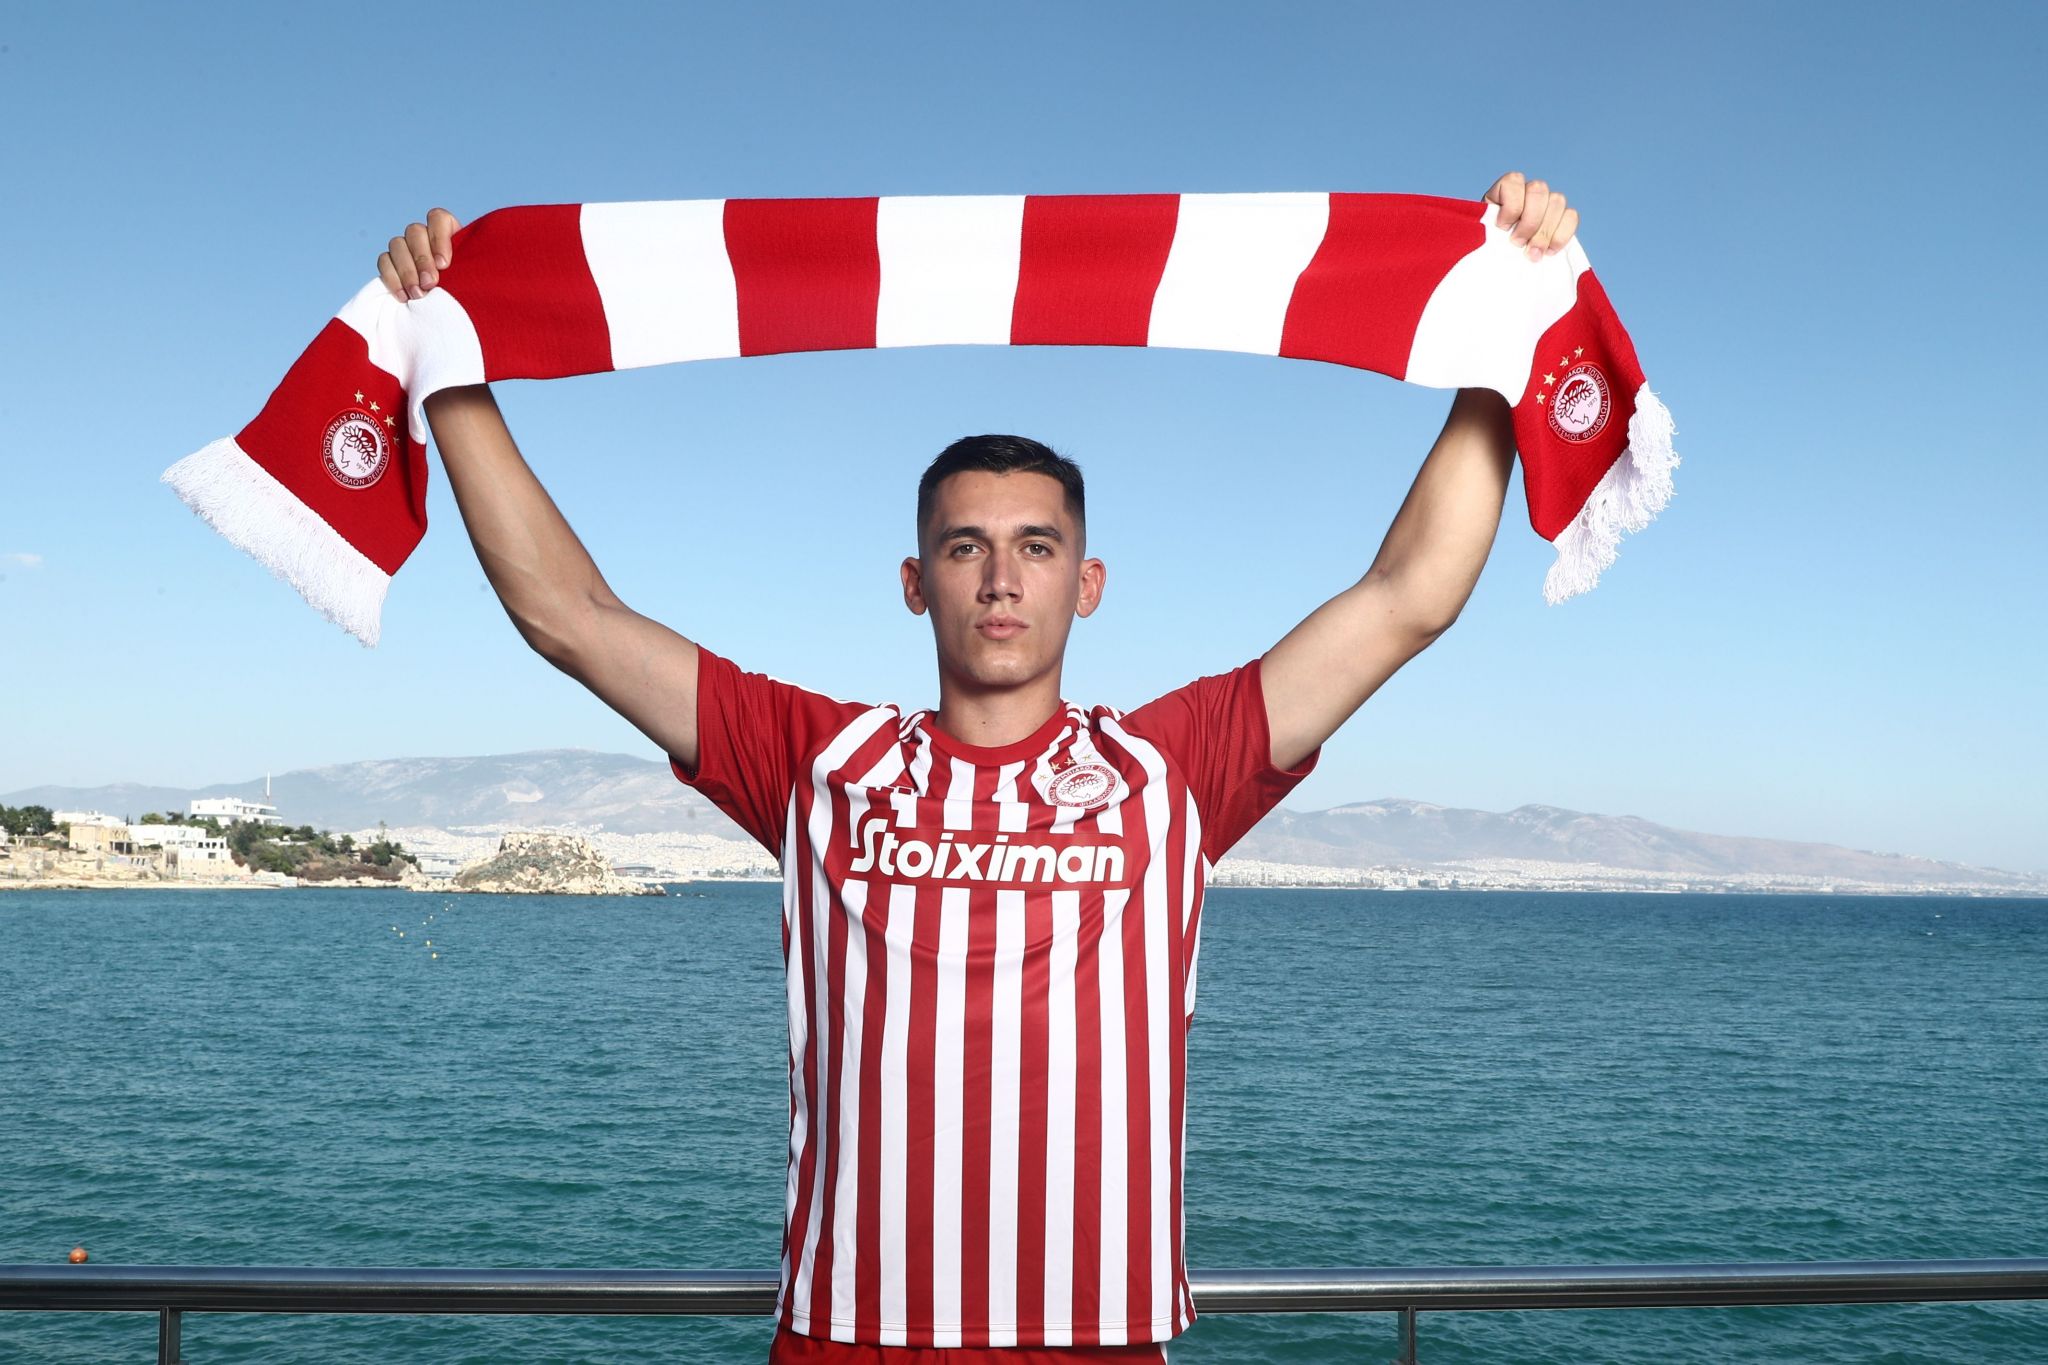 Sotiris Alexandropoulos joins Olympiacos - ΟΛΥΜΠΙΑΚΟΣ - Olympiacos.org